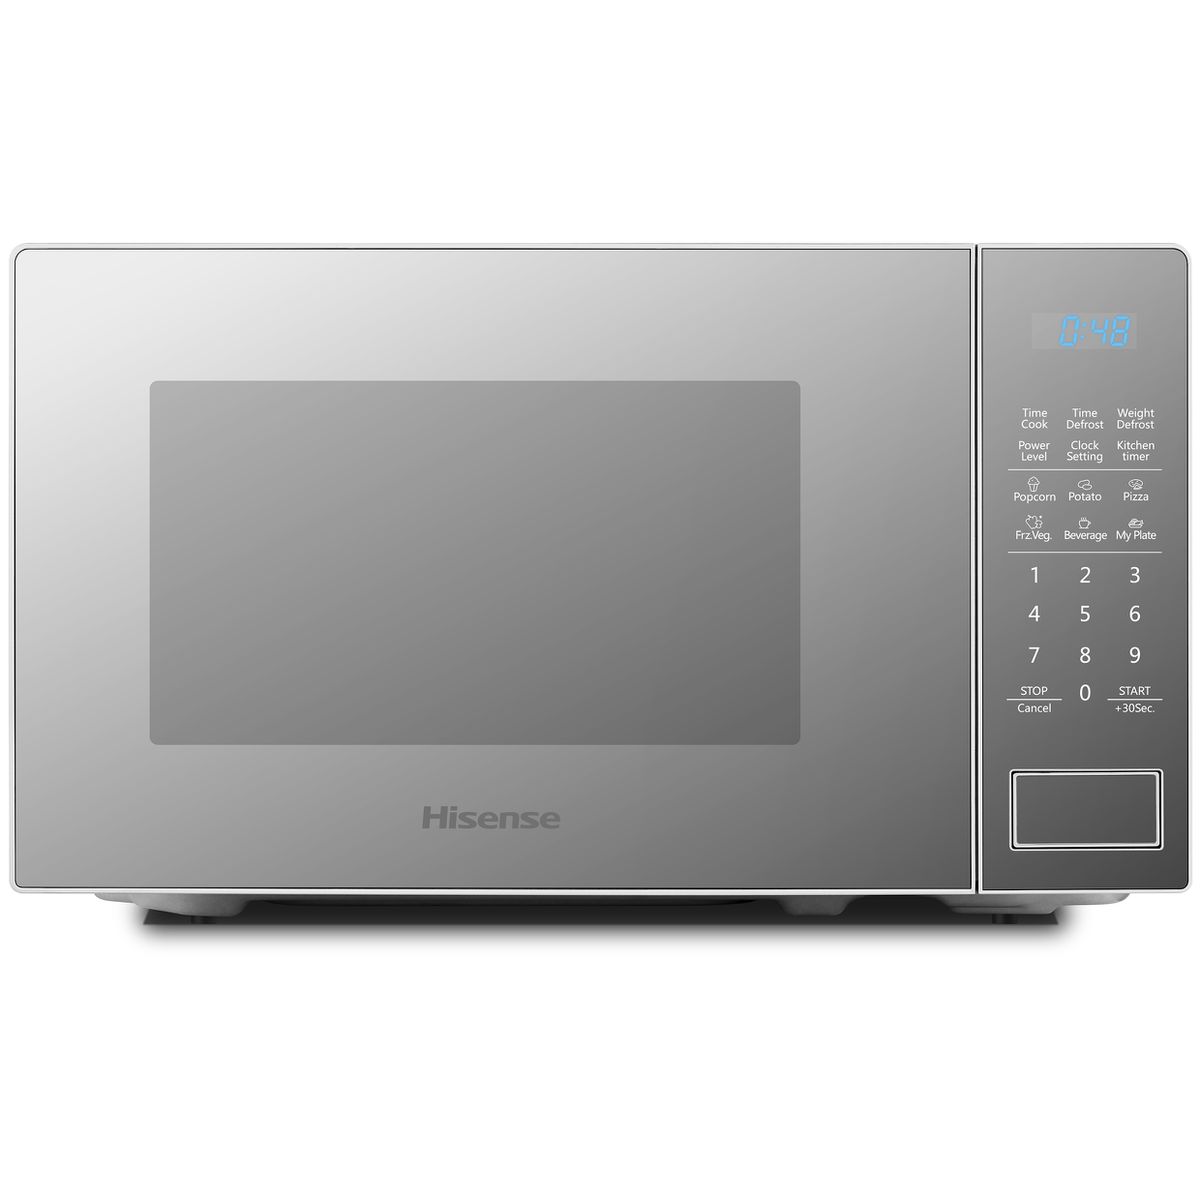 Hisense 20L Electronic Microwave Oven - Mirror Buy Online in Zimbabwe thedailysale.shop